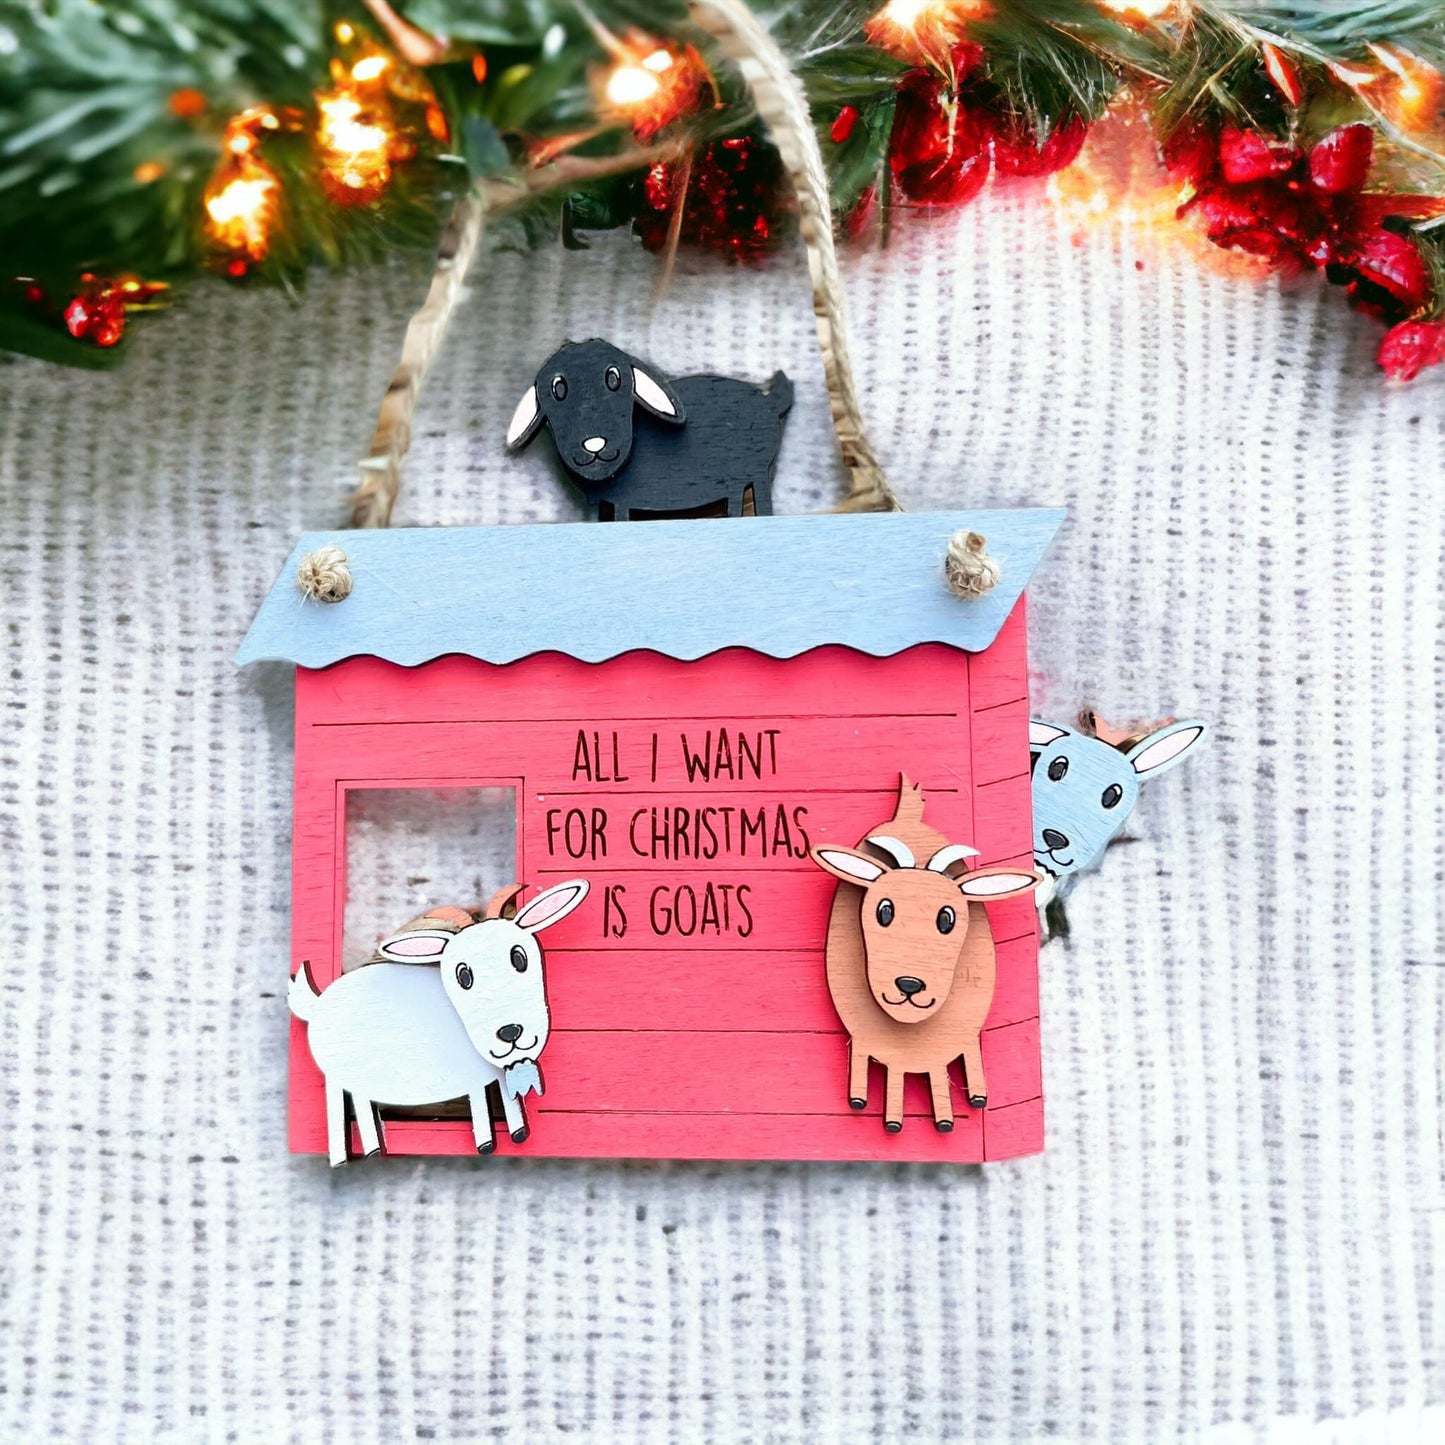 All I want for Christmas is goats